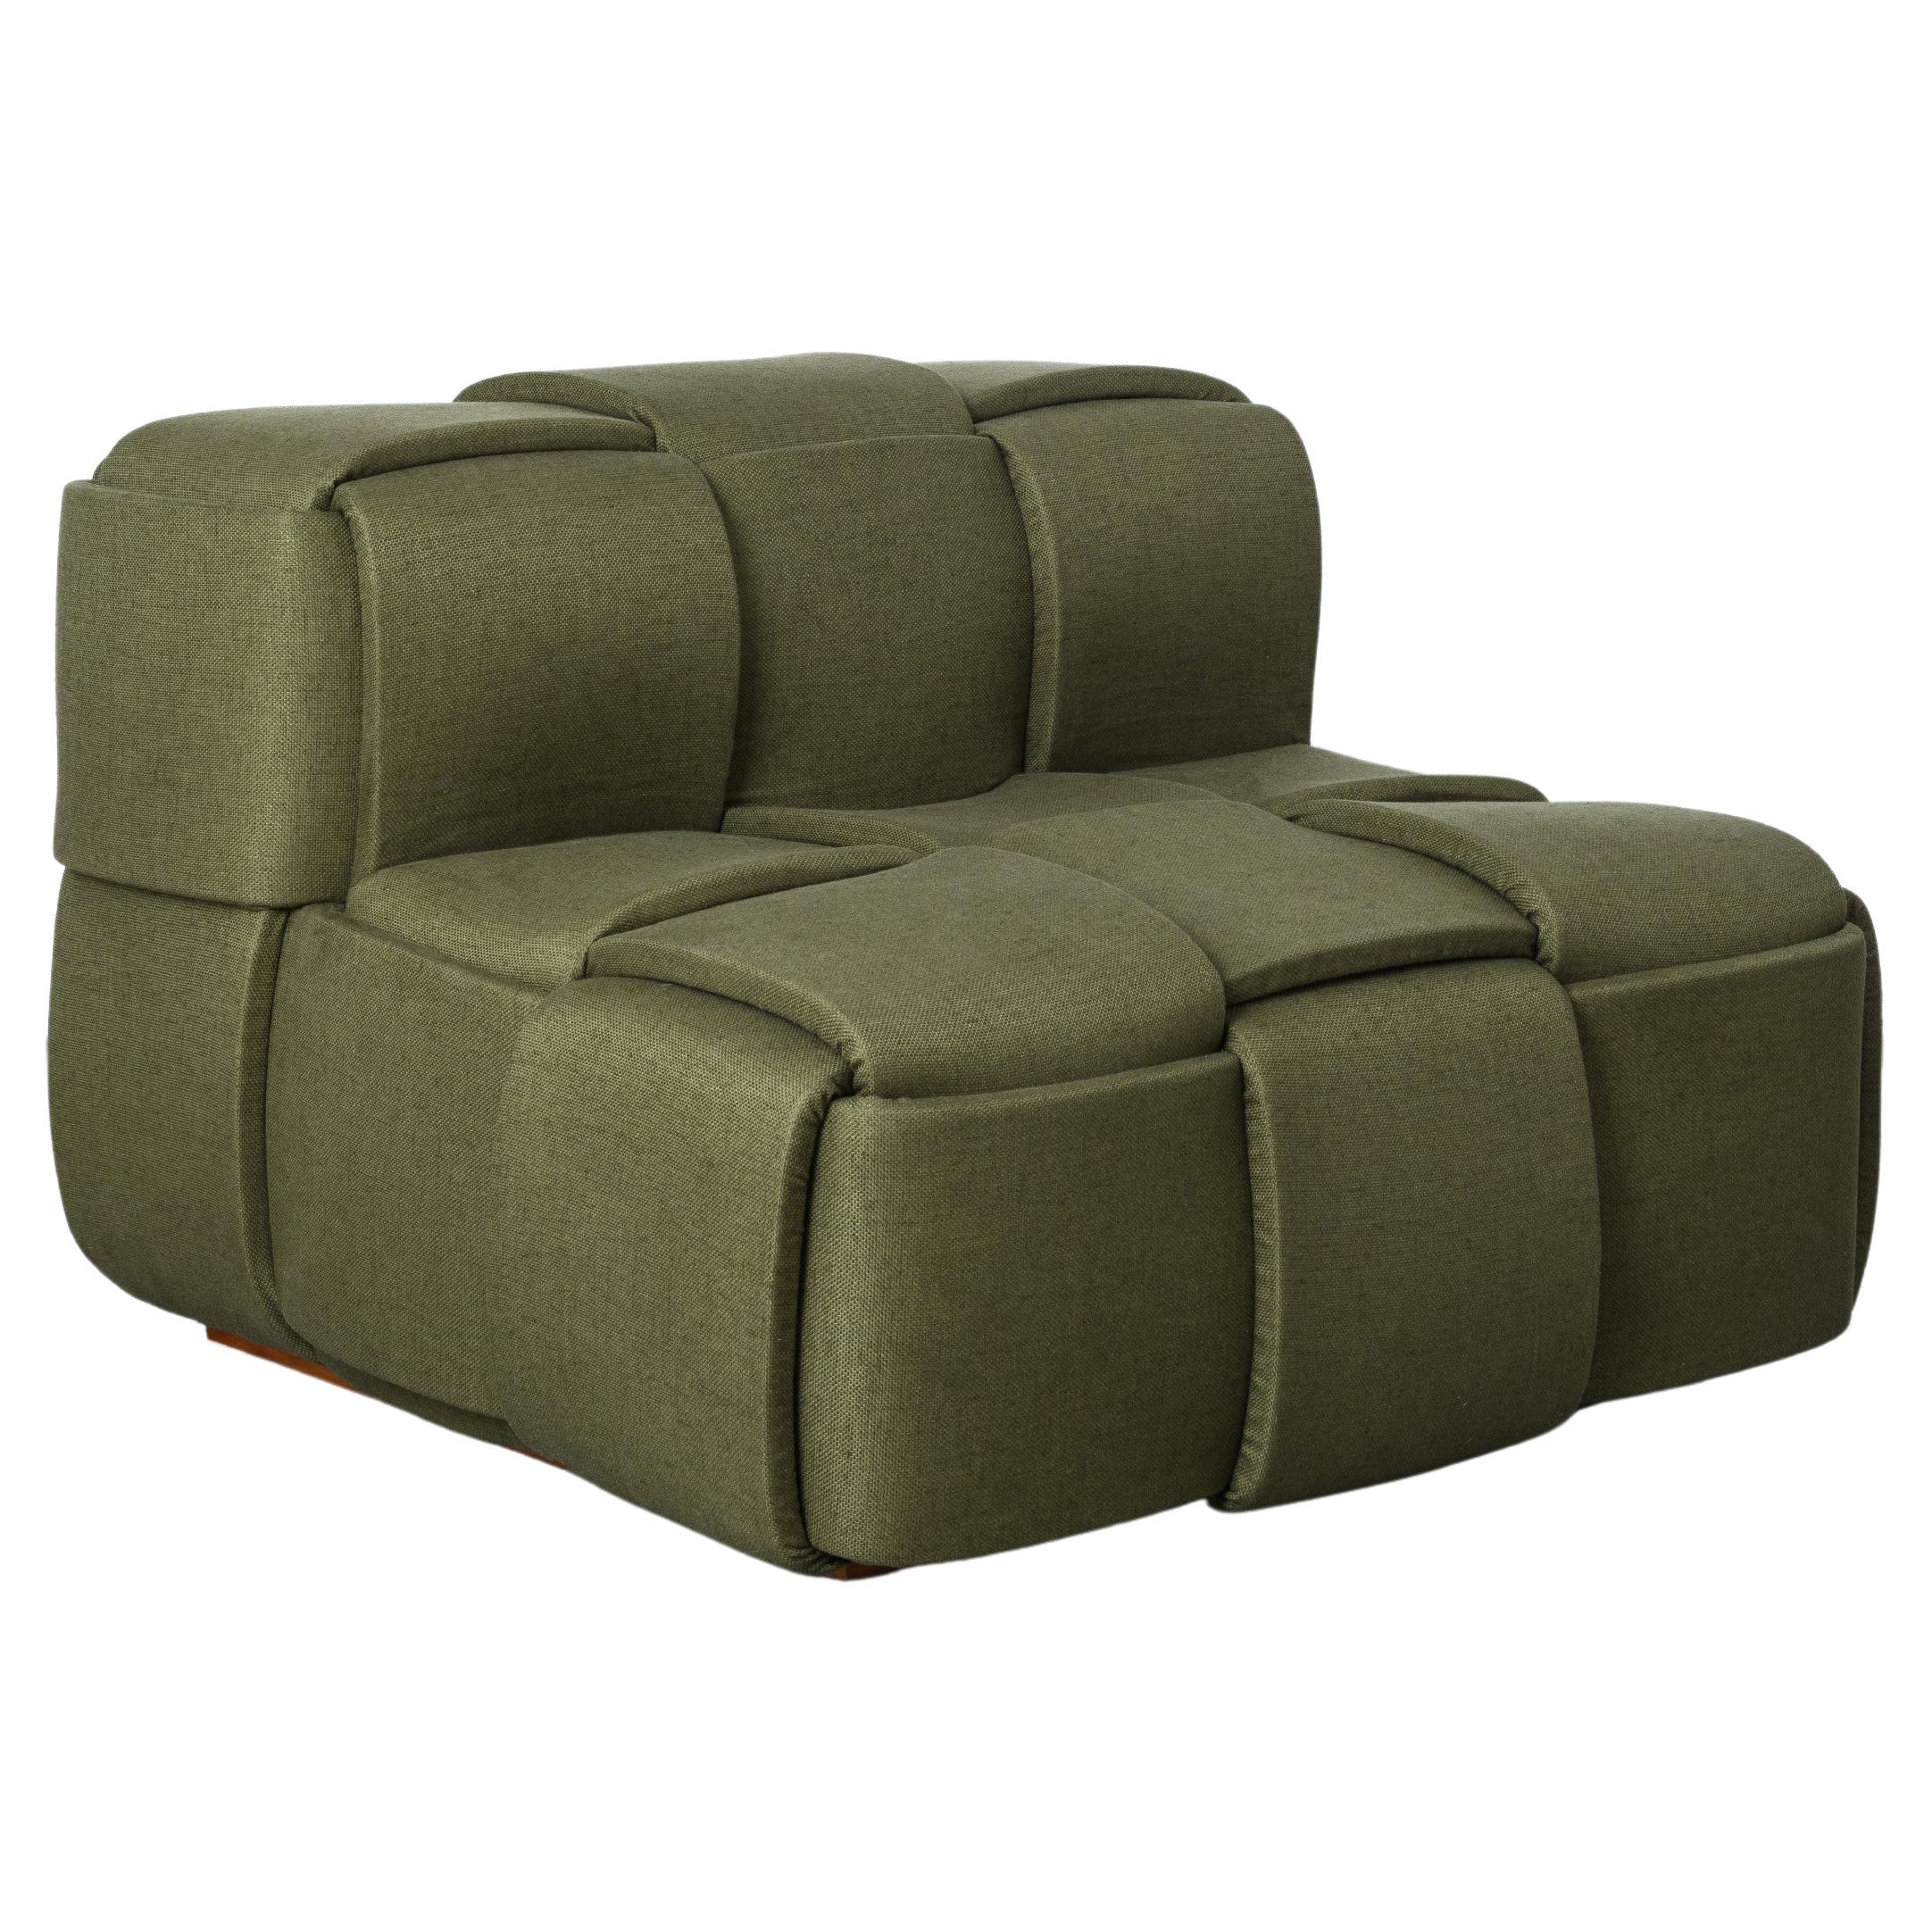 Trama G Lounge Chair - Linen For Sale